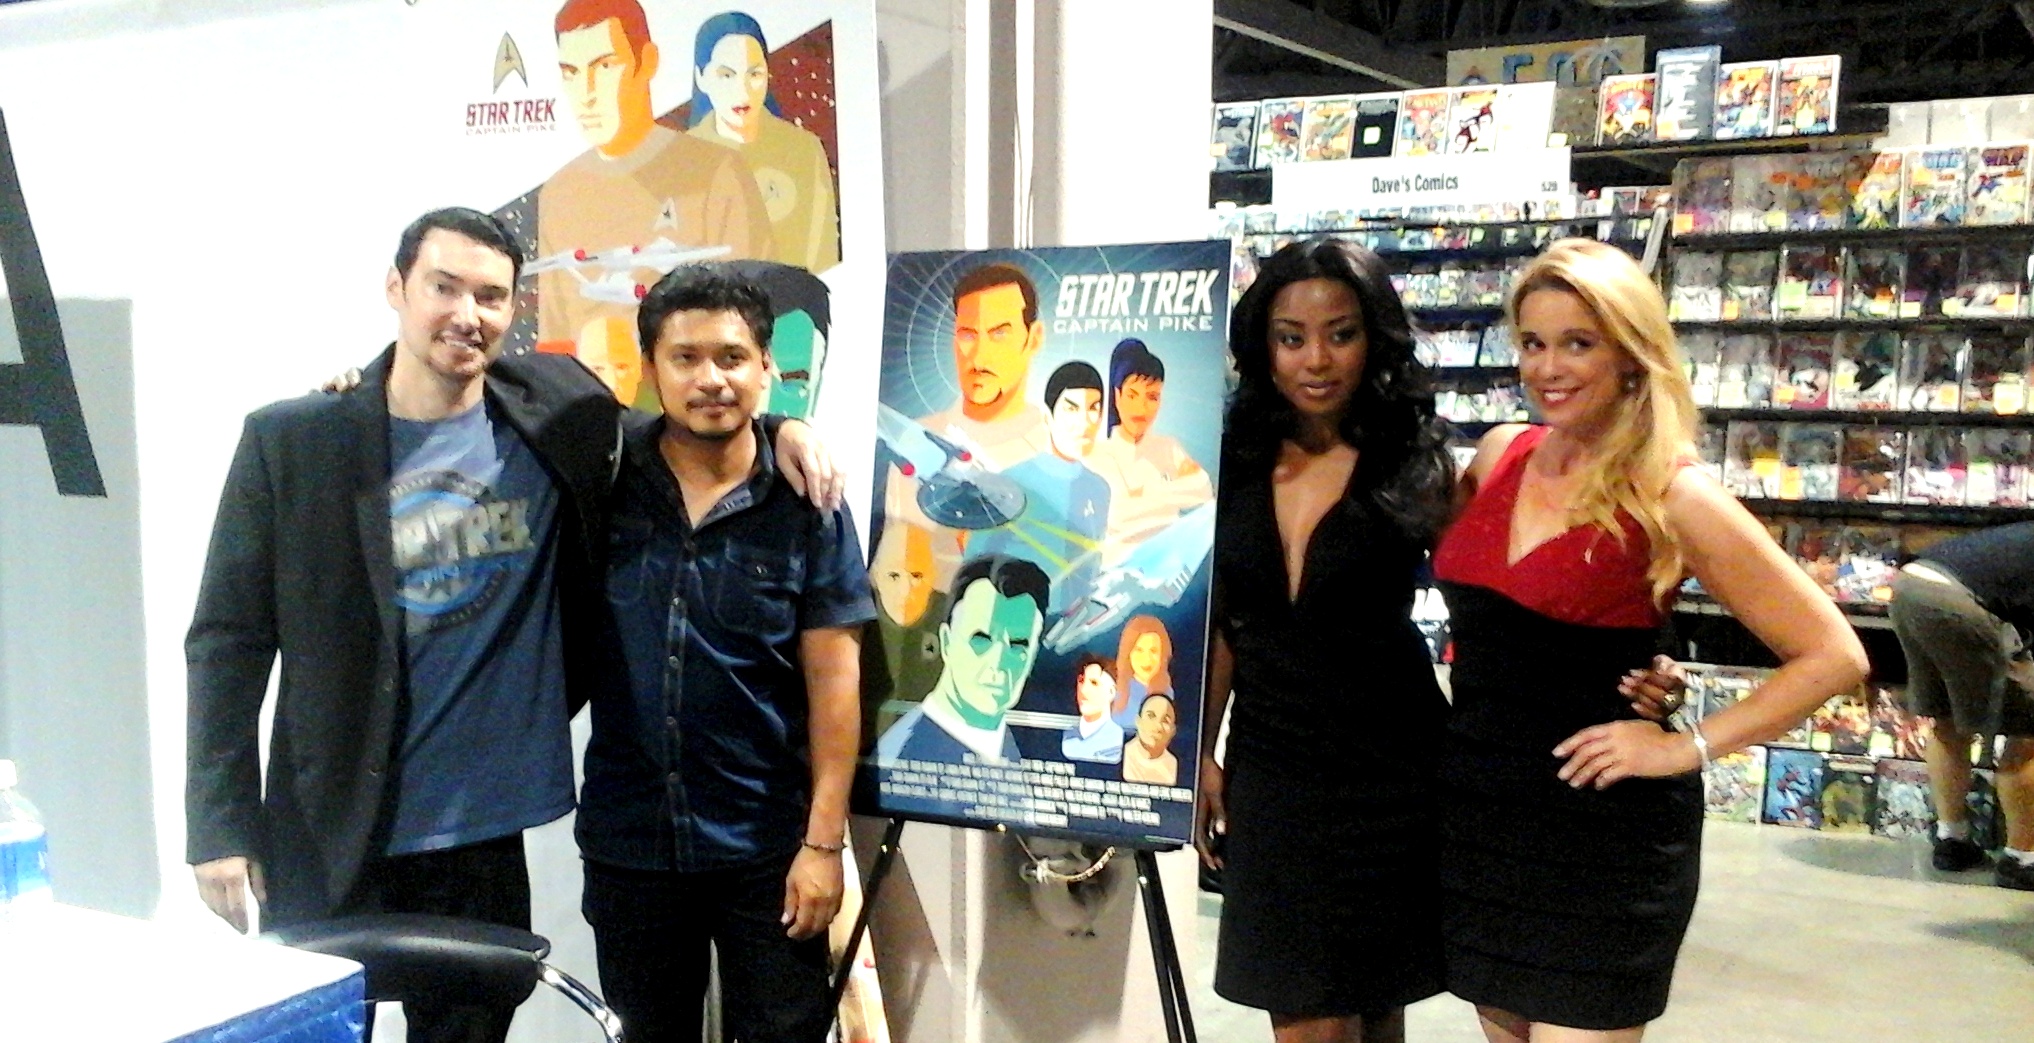 At Long Beach Comic Con 2015 with a few of my cast mates from the fan film 